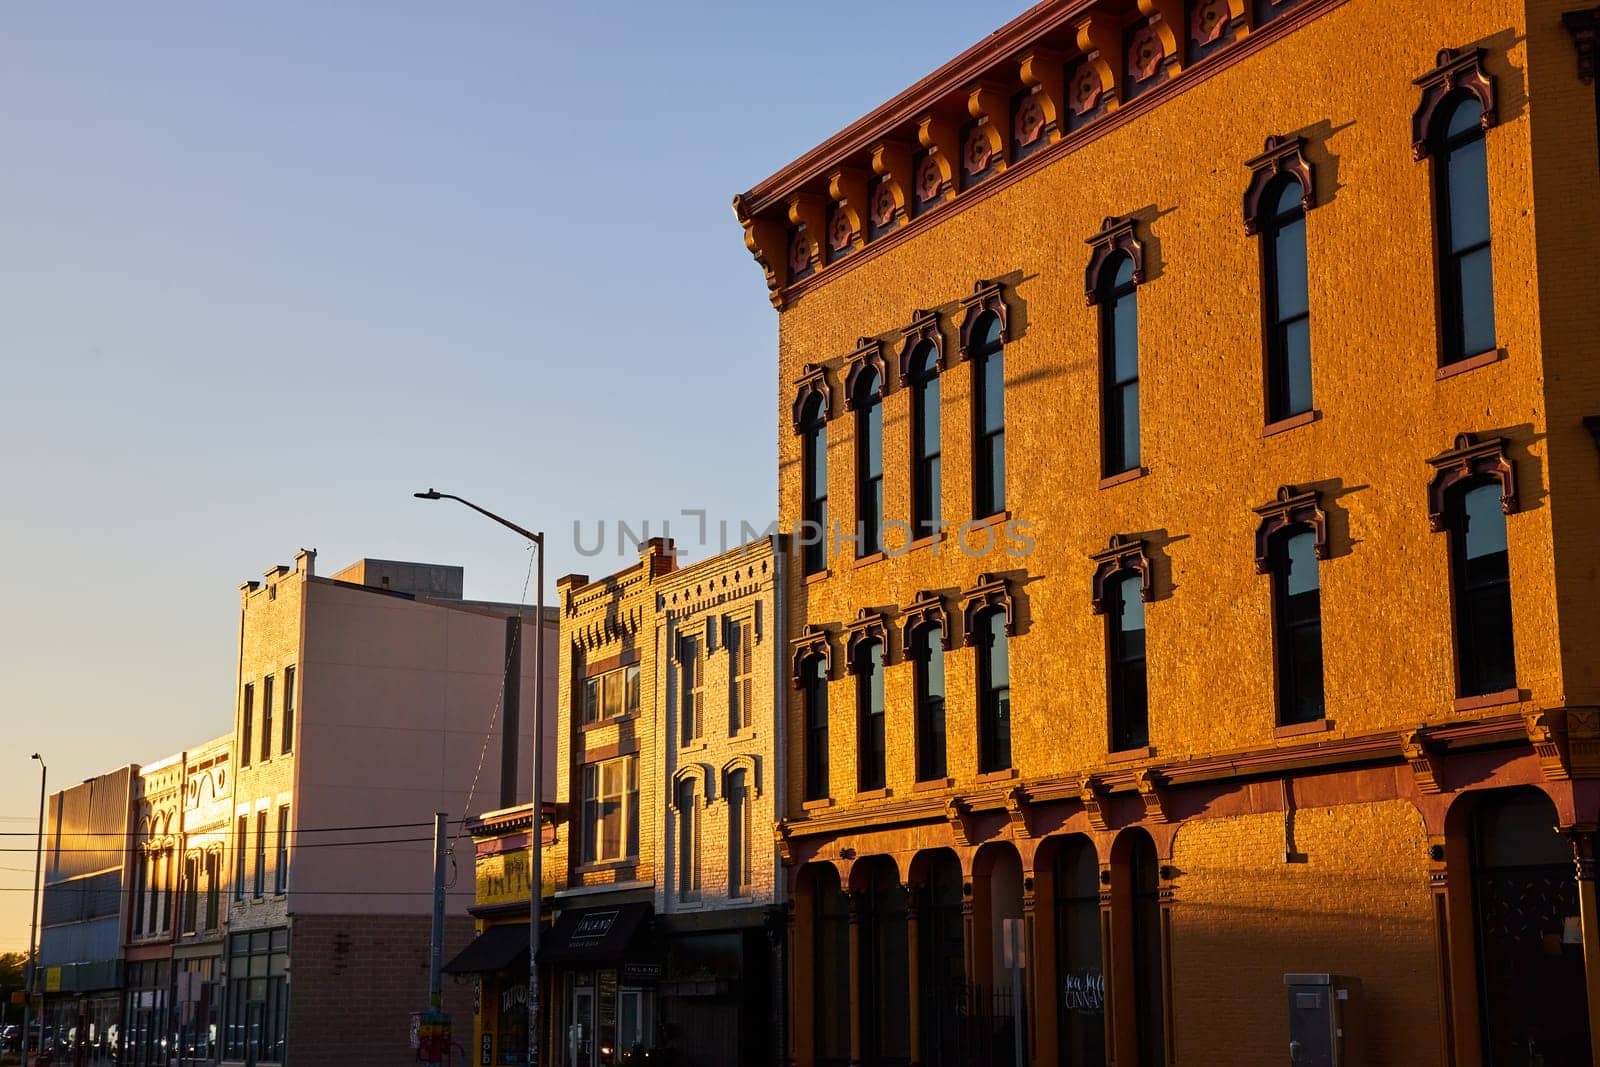 Golden Hour on Historic Downtown Muncie Street by njproductions